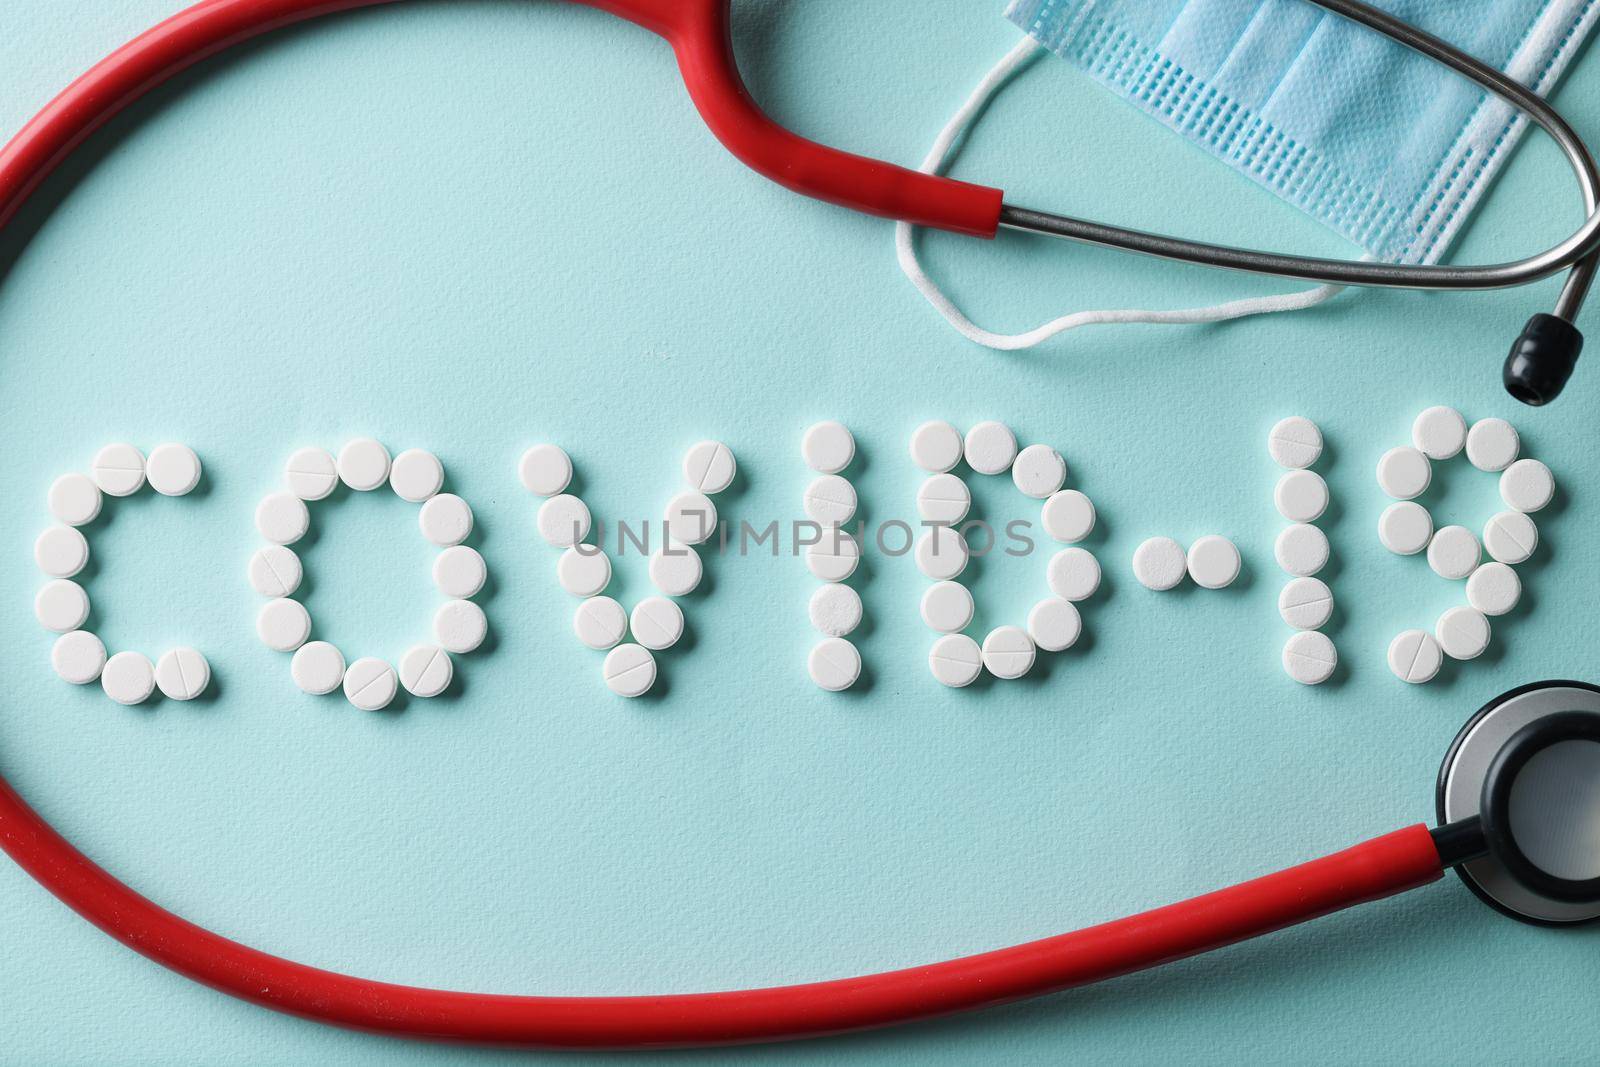 Top view of covid lettering made of tablets, stethoscope tool on surface, protective face mask, prevention coronavirus spread. Illness, antibody, medicine, healthcare, medication concept